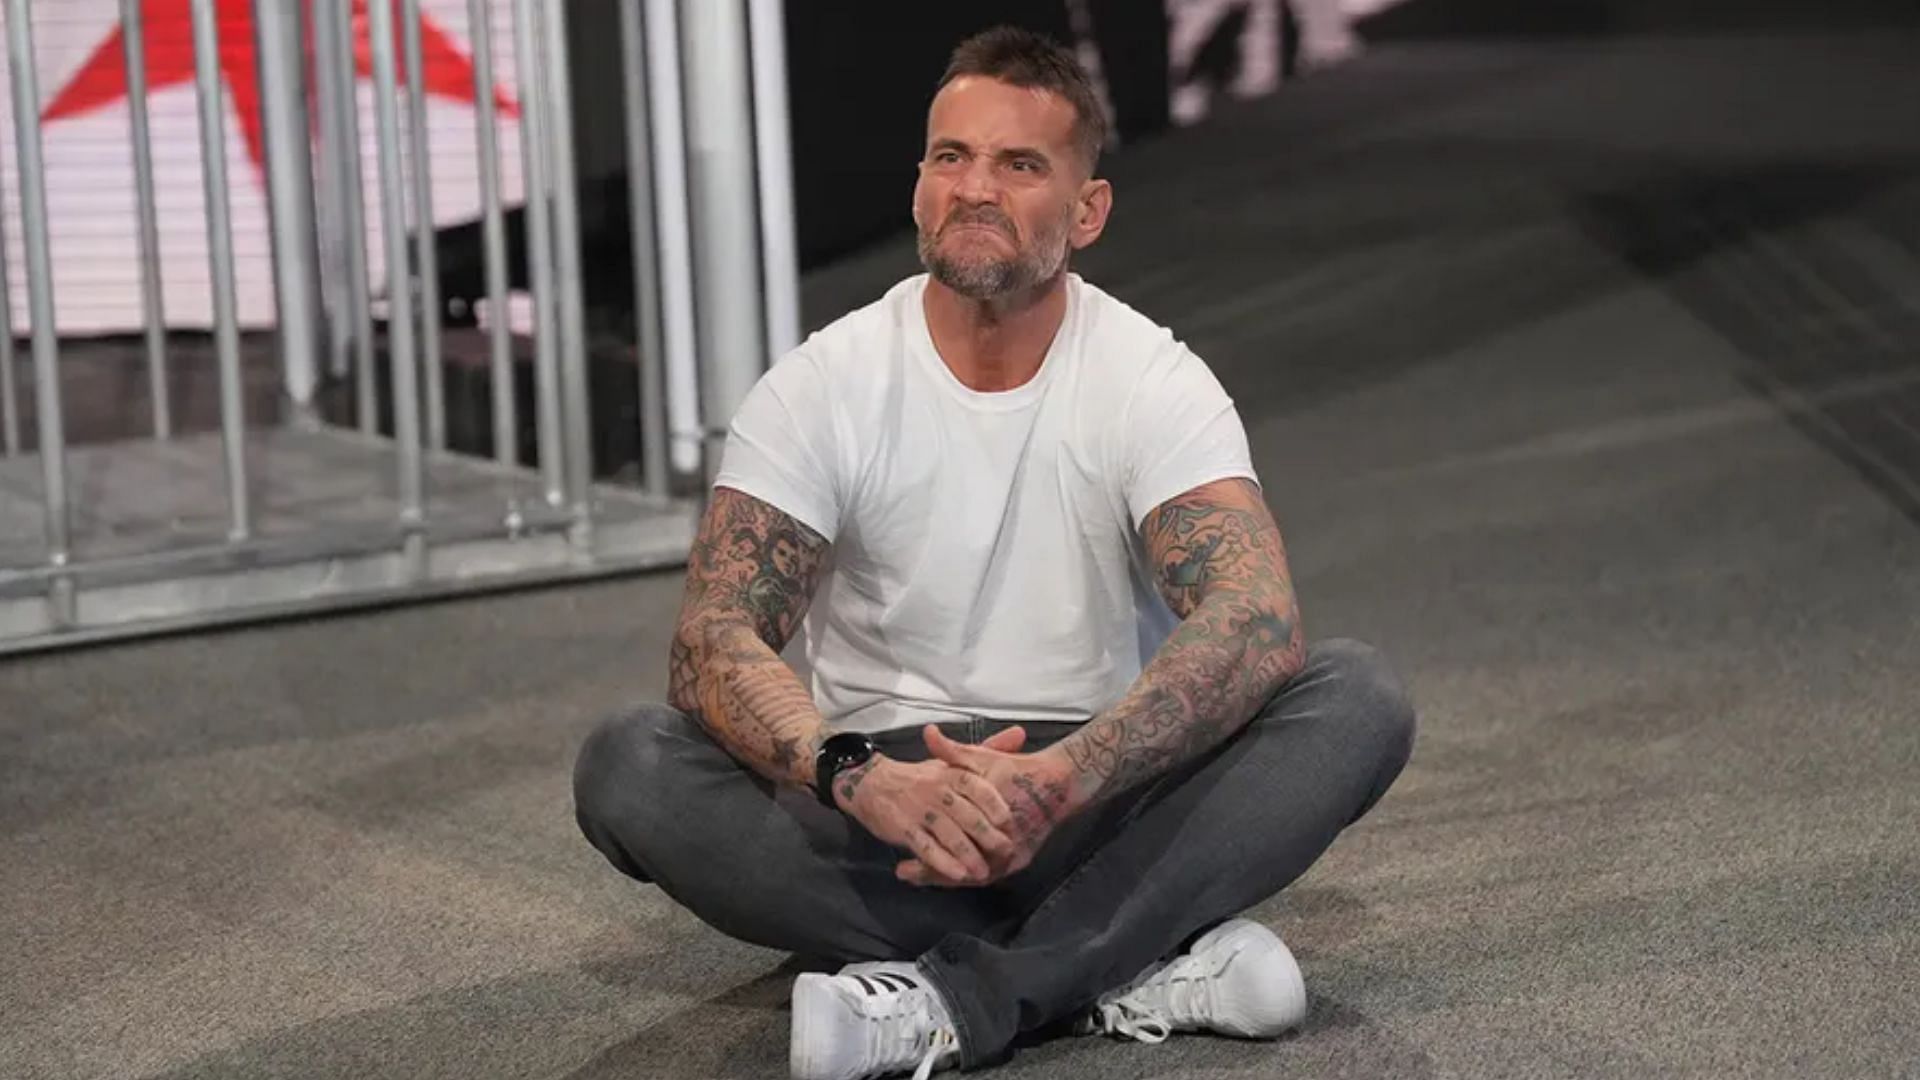 CM Punk is a former World Champion in WWE